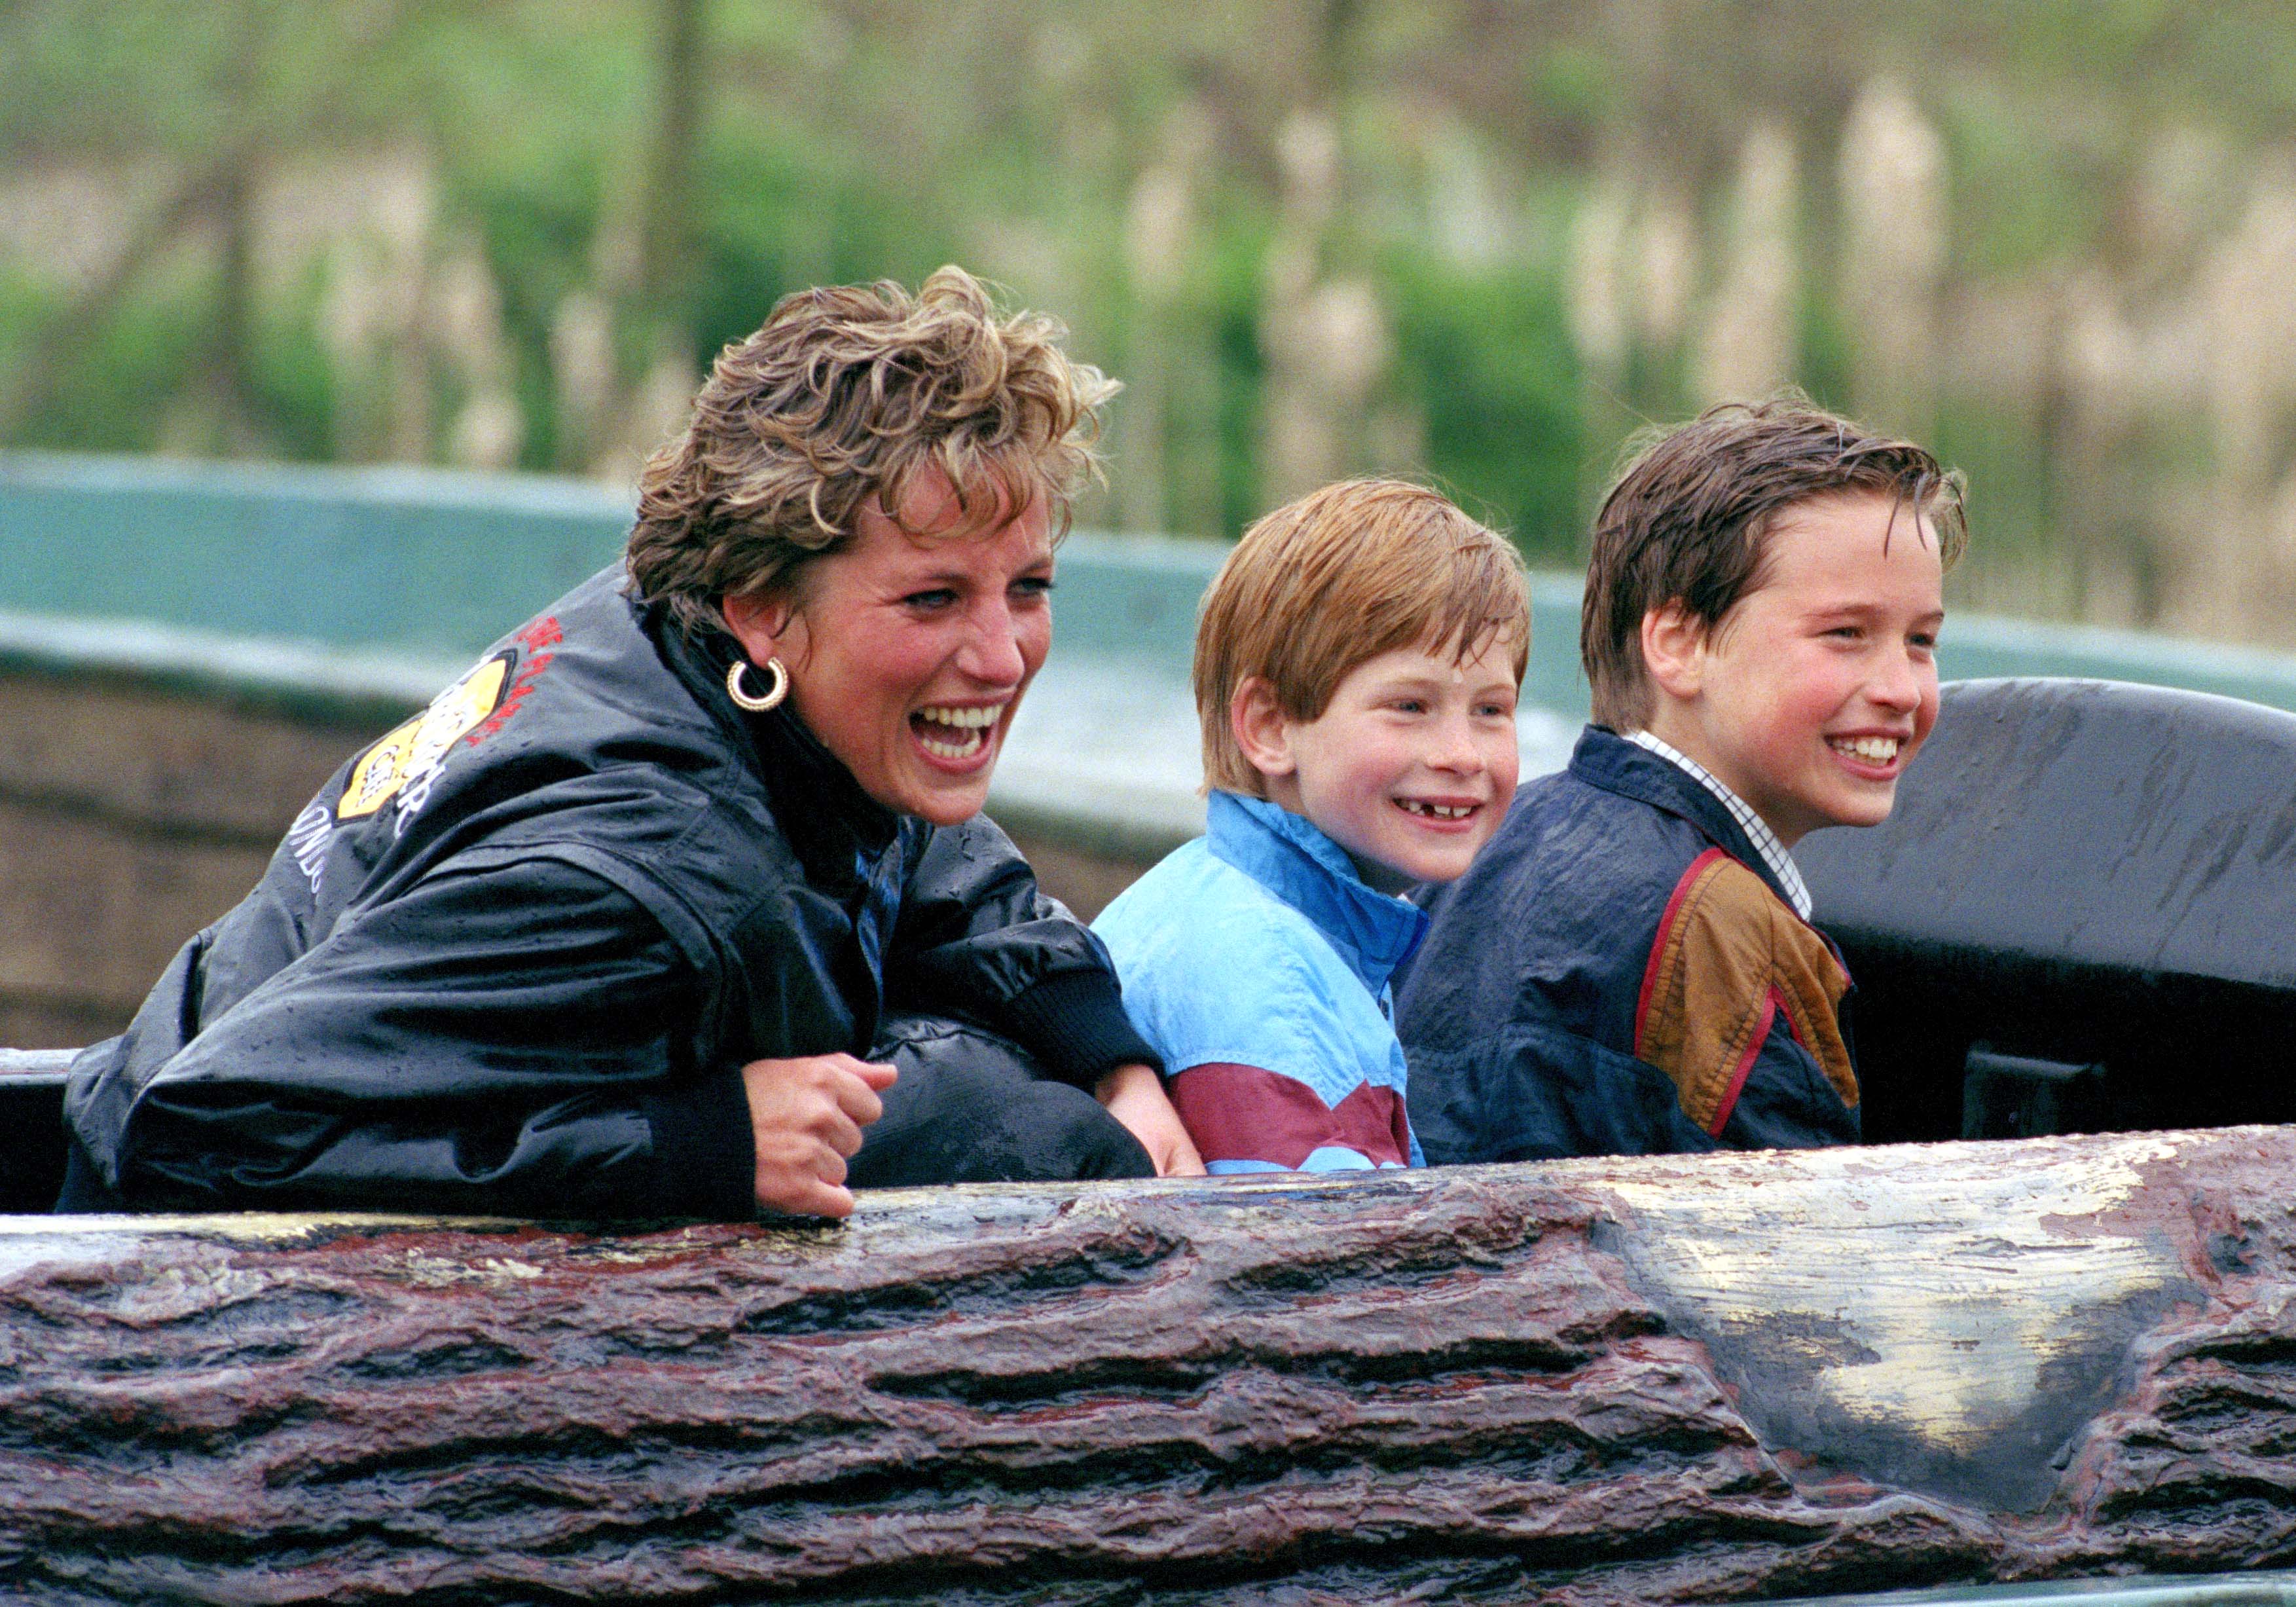 Princess Diana with sons Prince William and Prince Harry during their visit at The 'Thorpe Park' Amusement Park. | Source: Getty Images